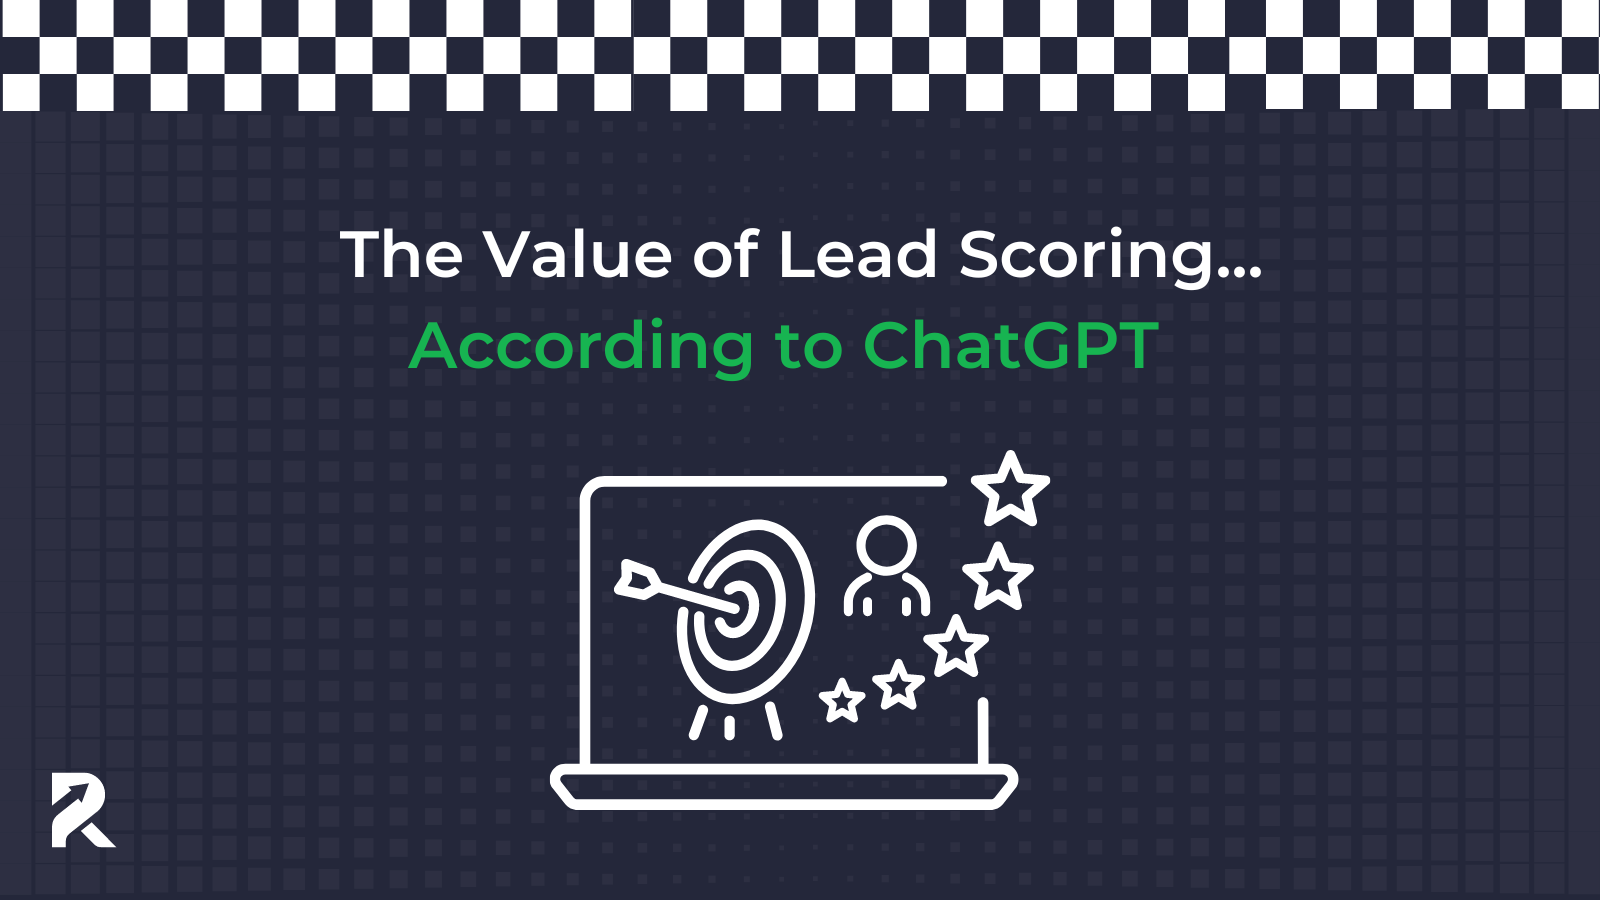 The Value of Lead Scoring... According to ChatGPT